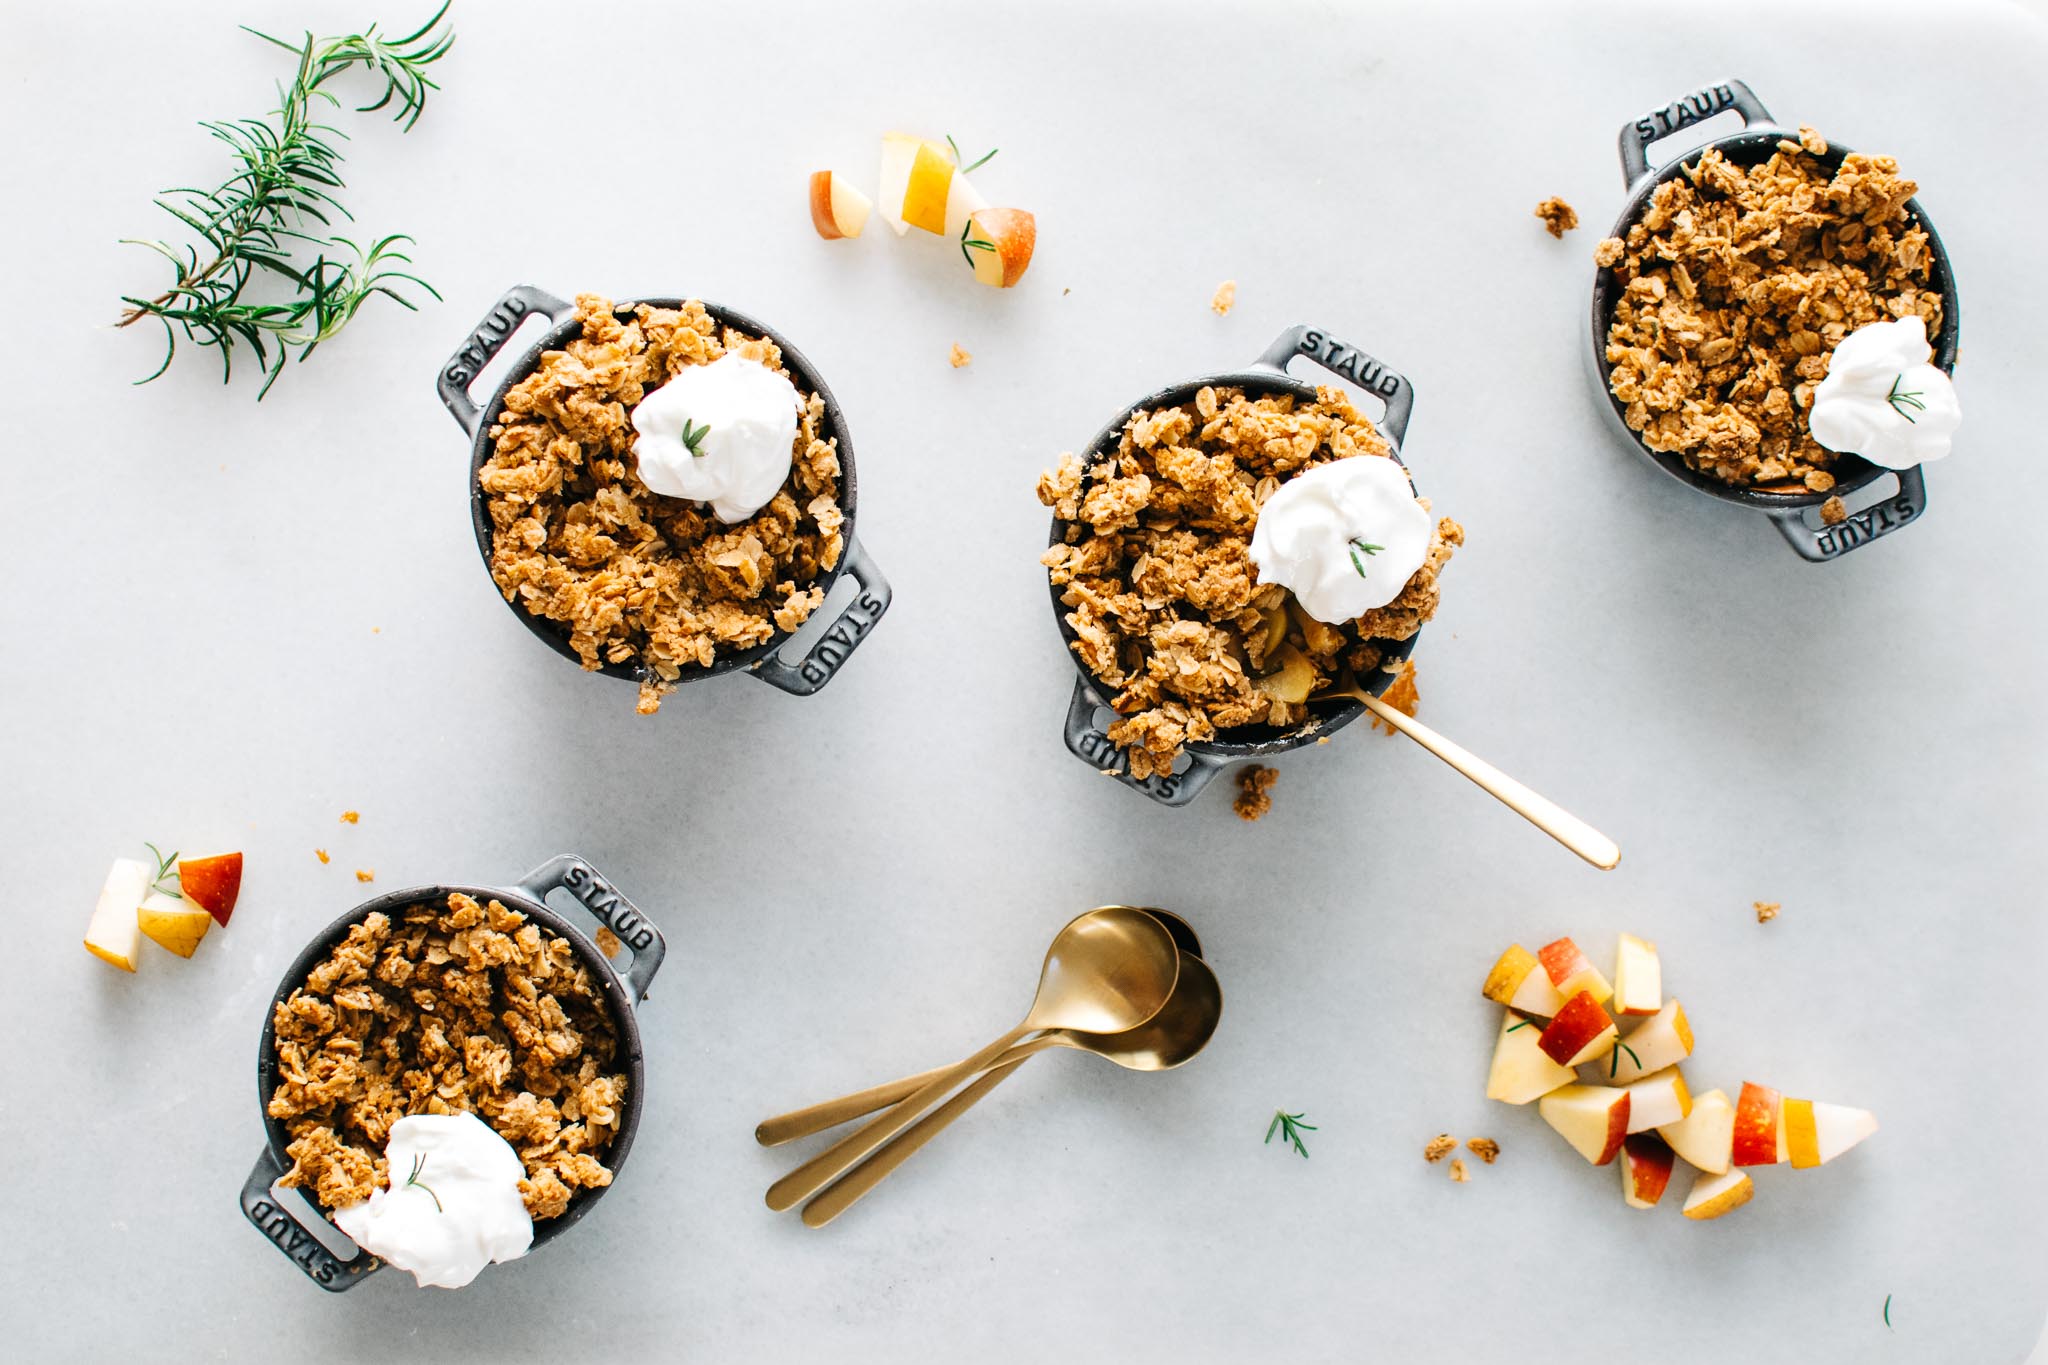 ASIAN PEAR & APPLE CRISP WITH MAPLE ROSEMARY CRUMBLE + A COOKBOOK PREVIEW!